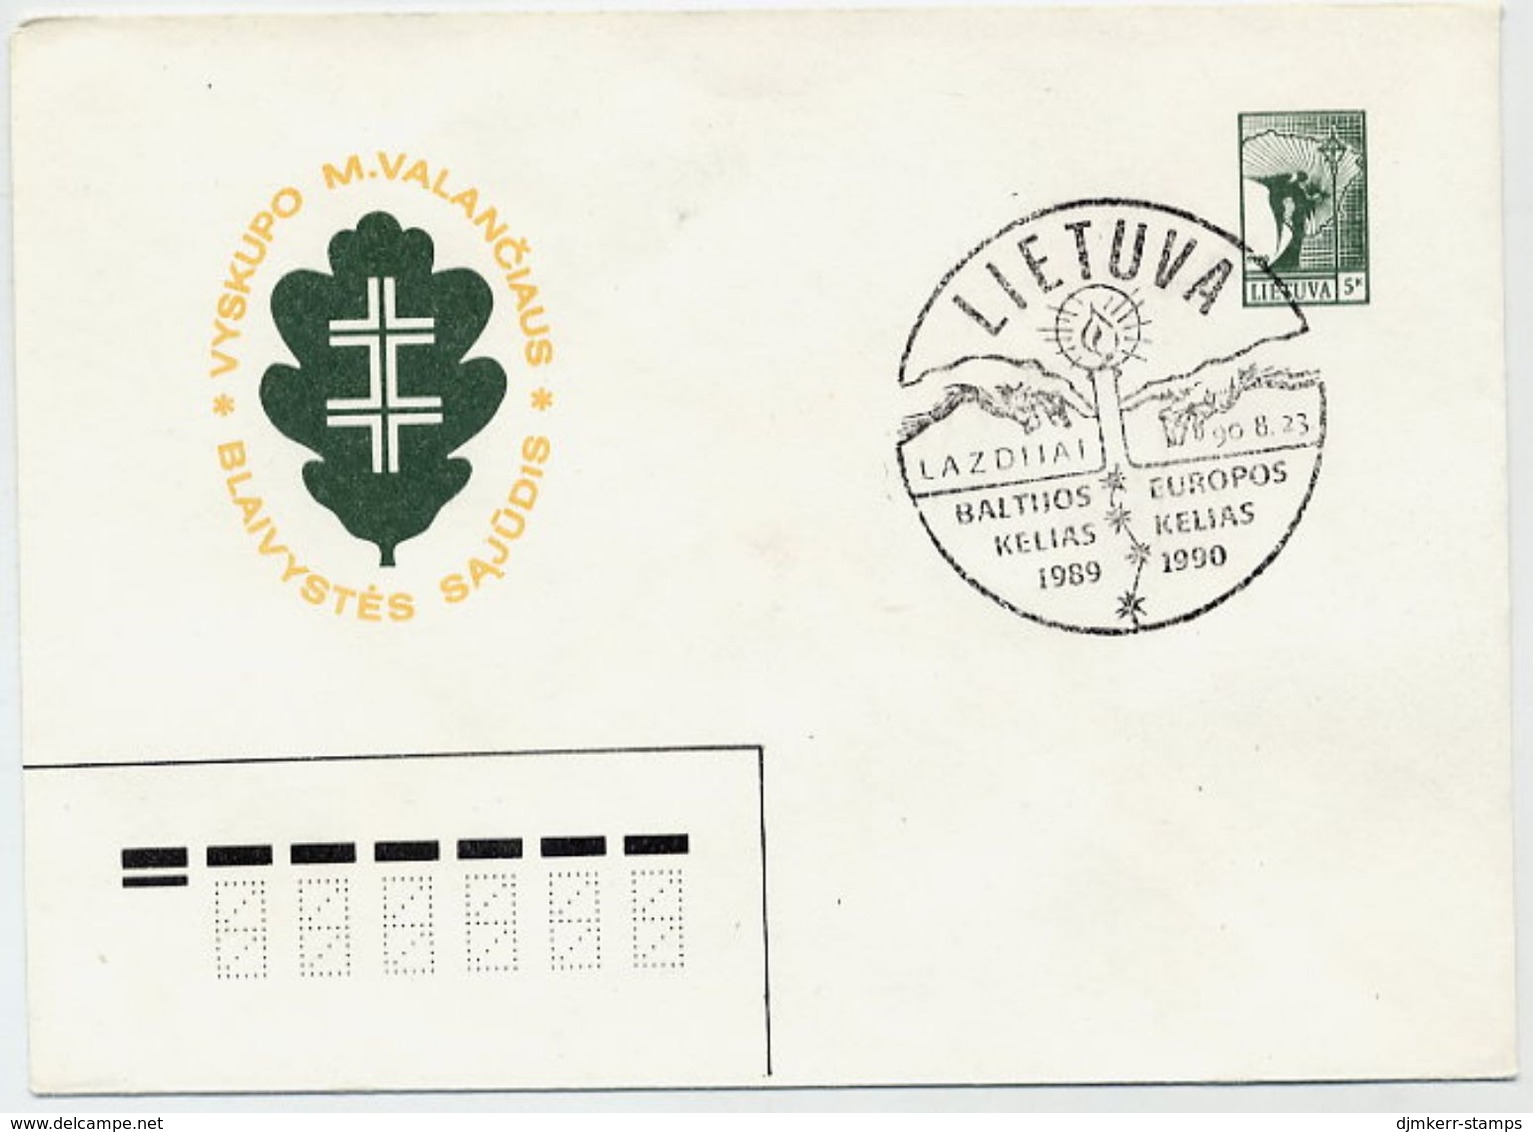 LITHUANIA 1990 Abstinence Movement Stationery Envelope, Cancelled.  Michel U6 - Litouwen